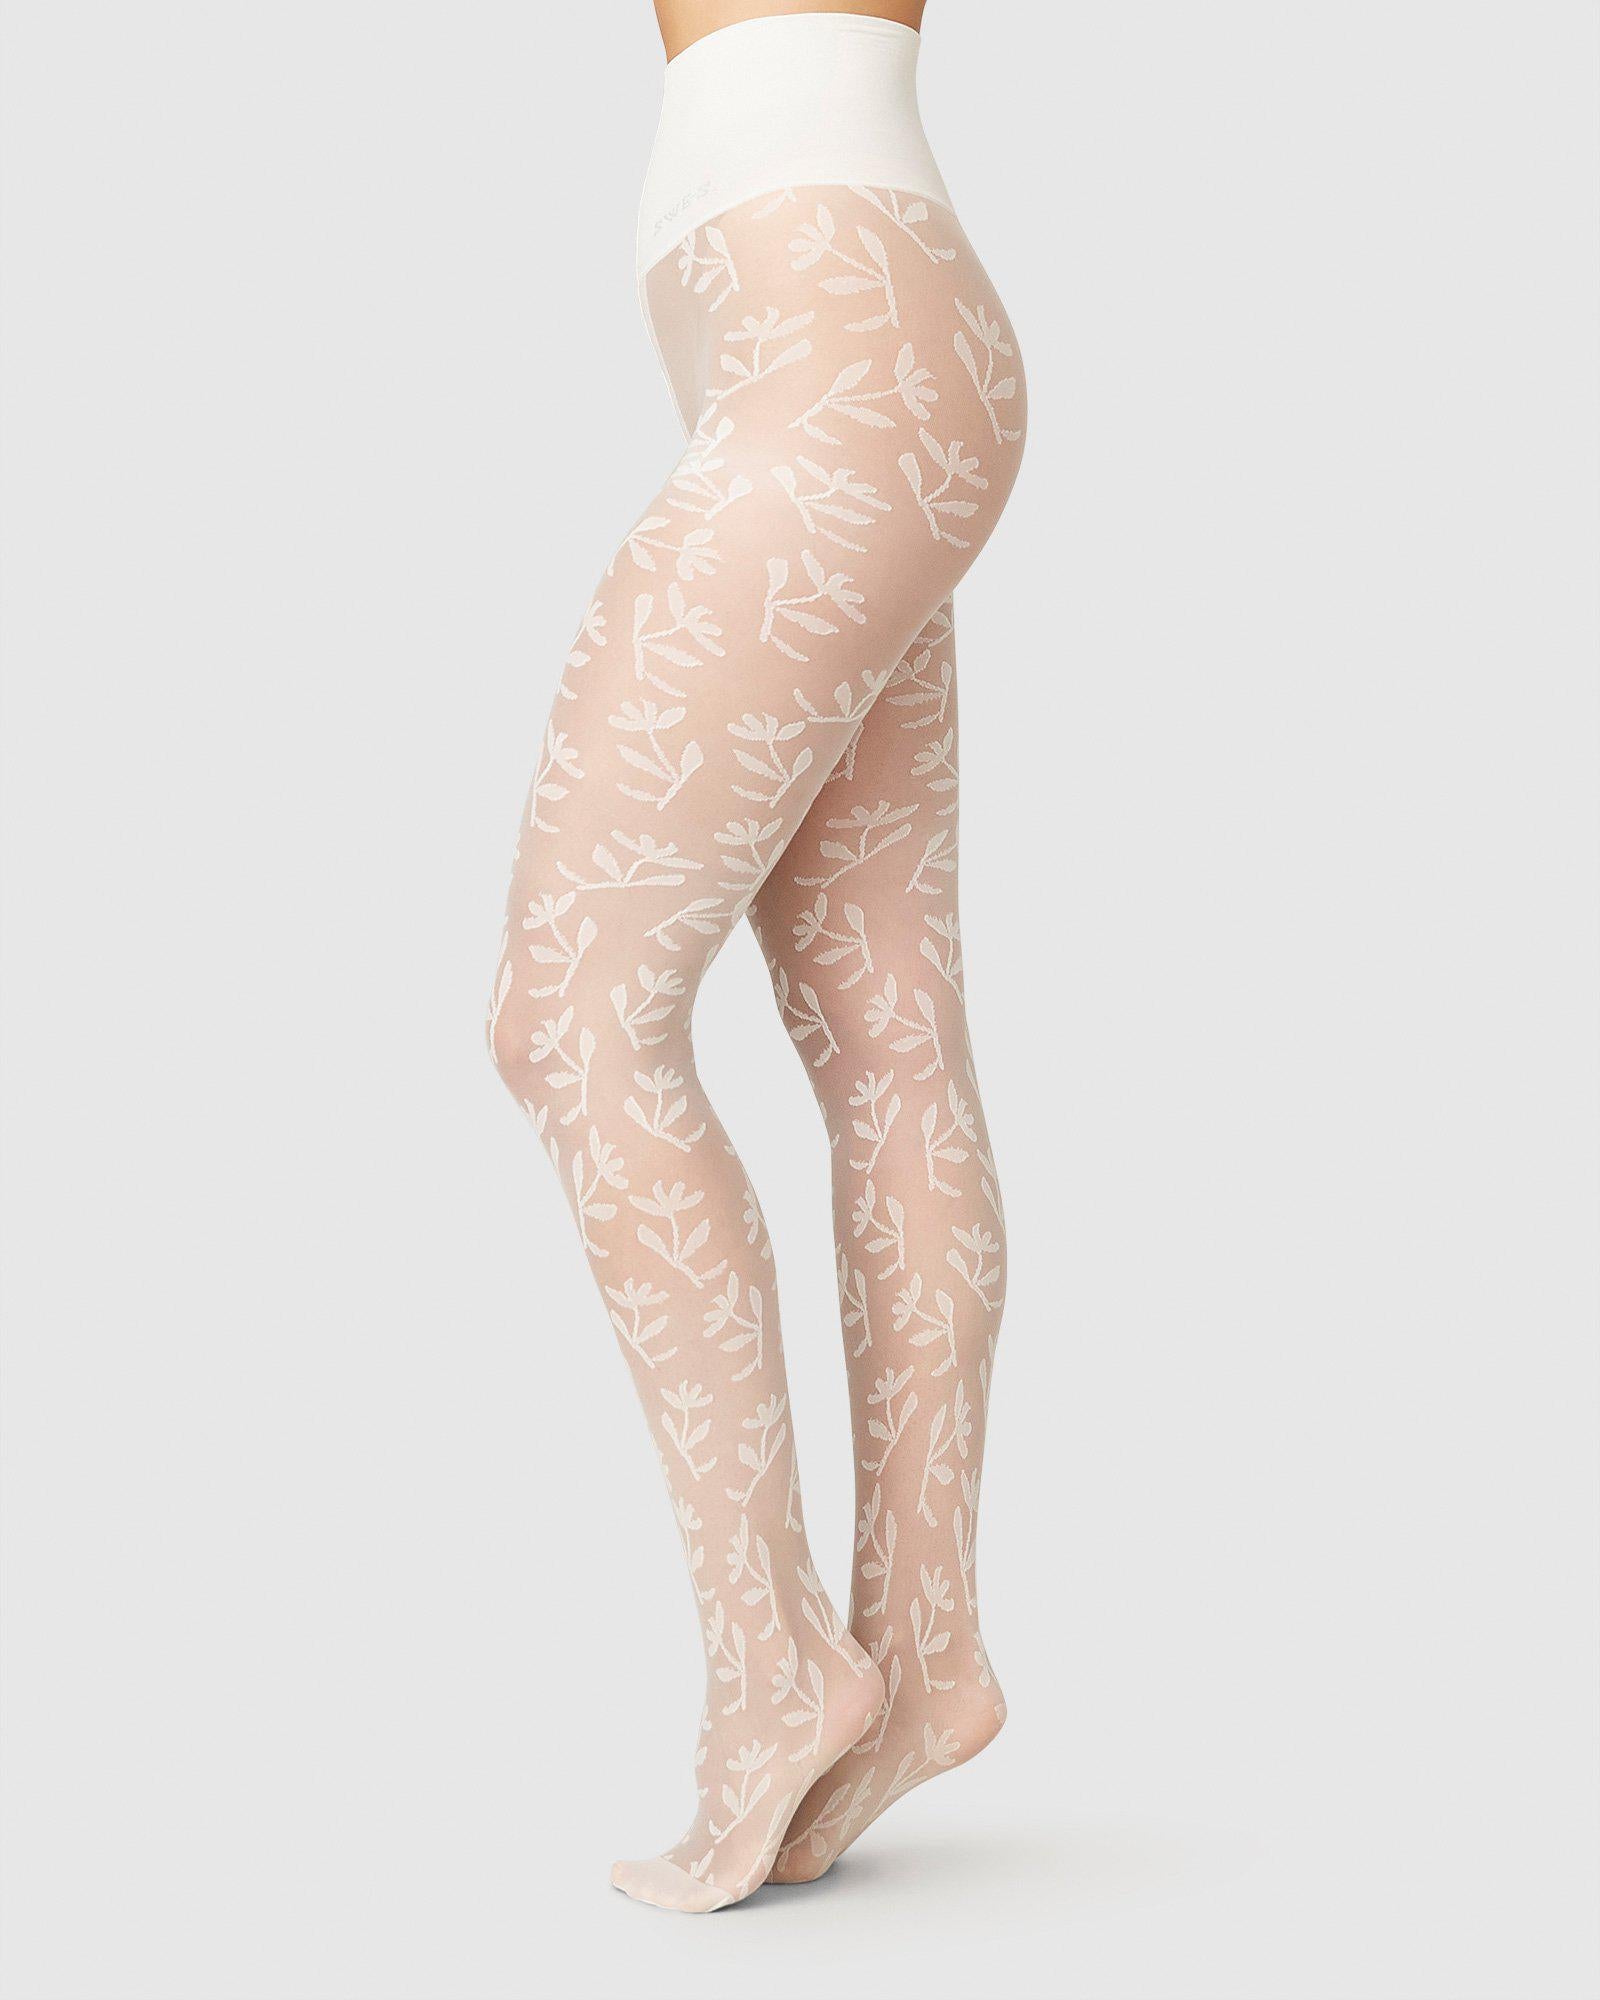 Sheer 40 Denier Stockings with Lace - Calzedonia